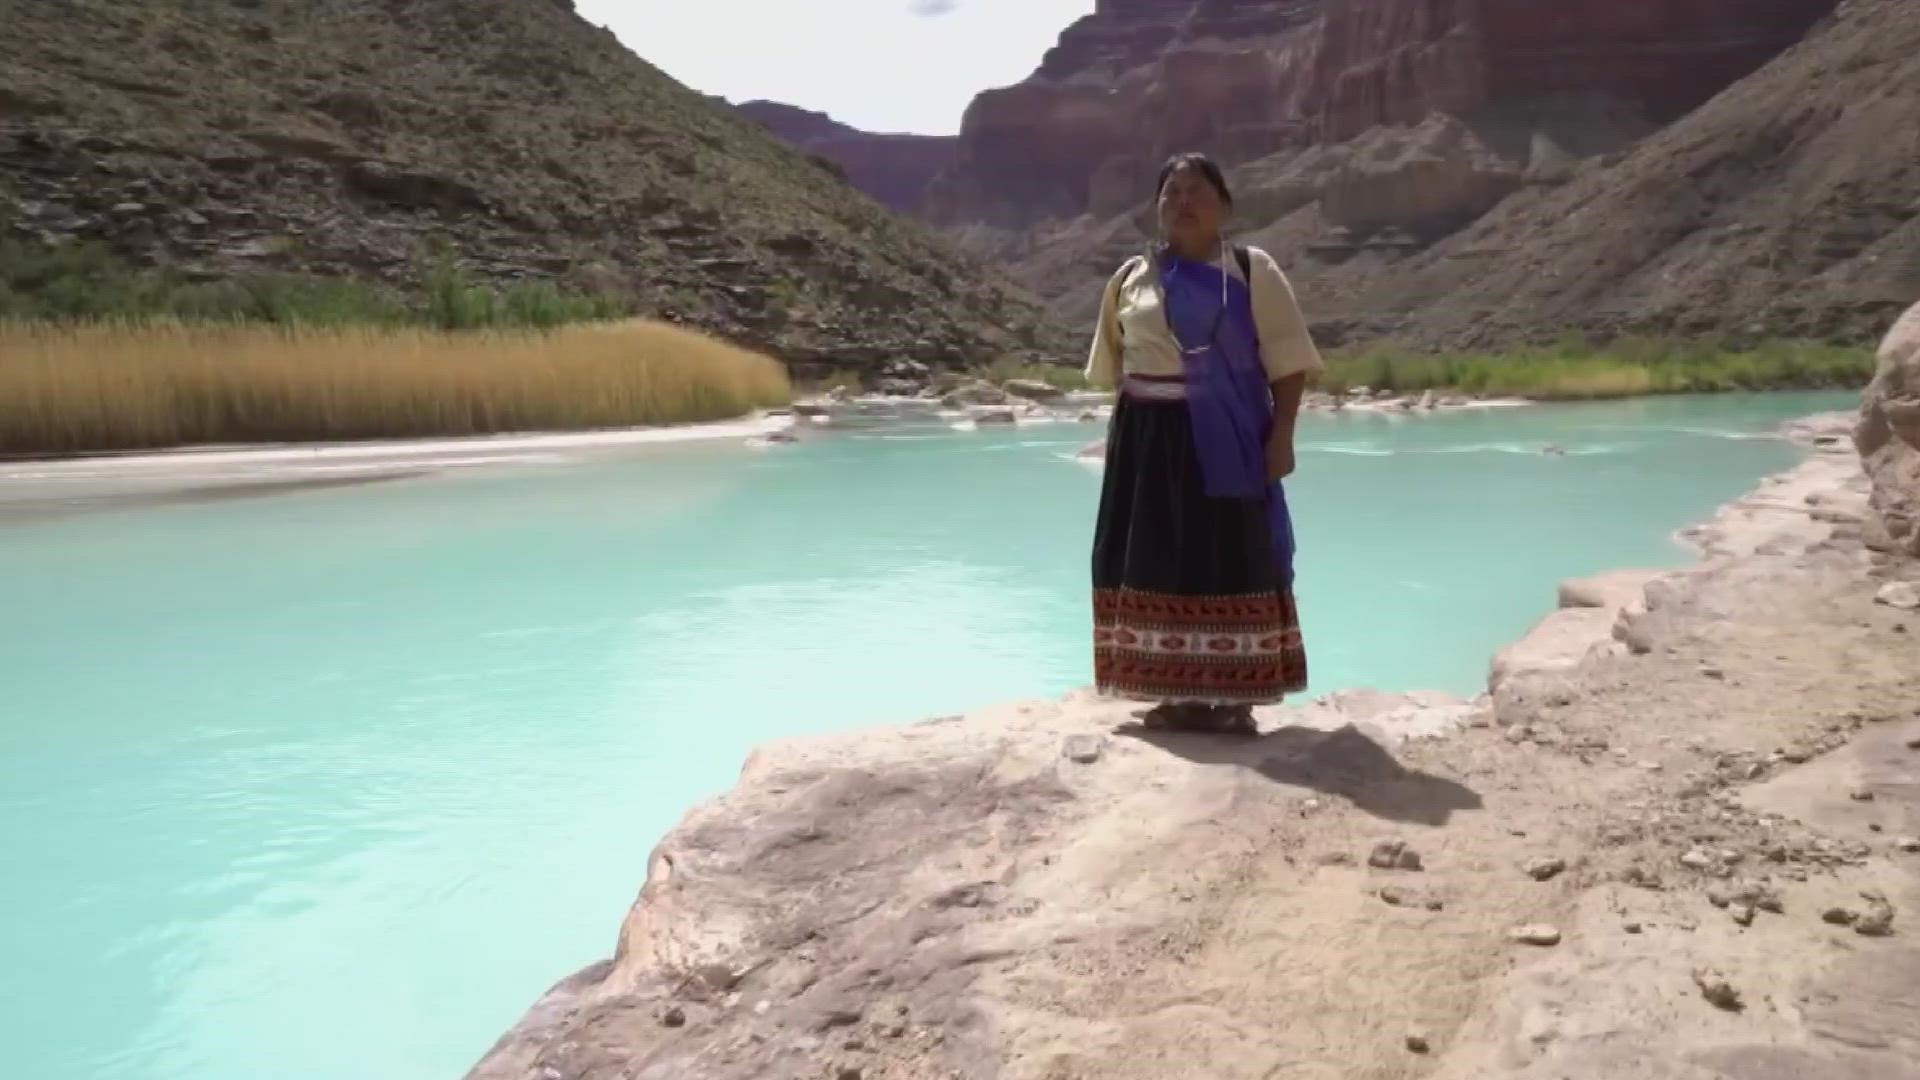 'Voices of the Grand Canyon' puts the story of the canyon in the hands of the Native American people who have called the canyon home for centuries.